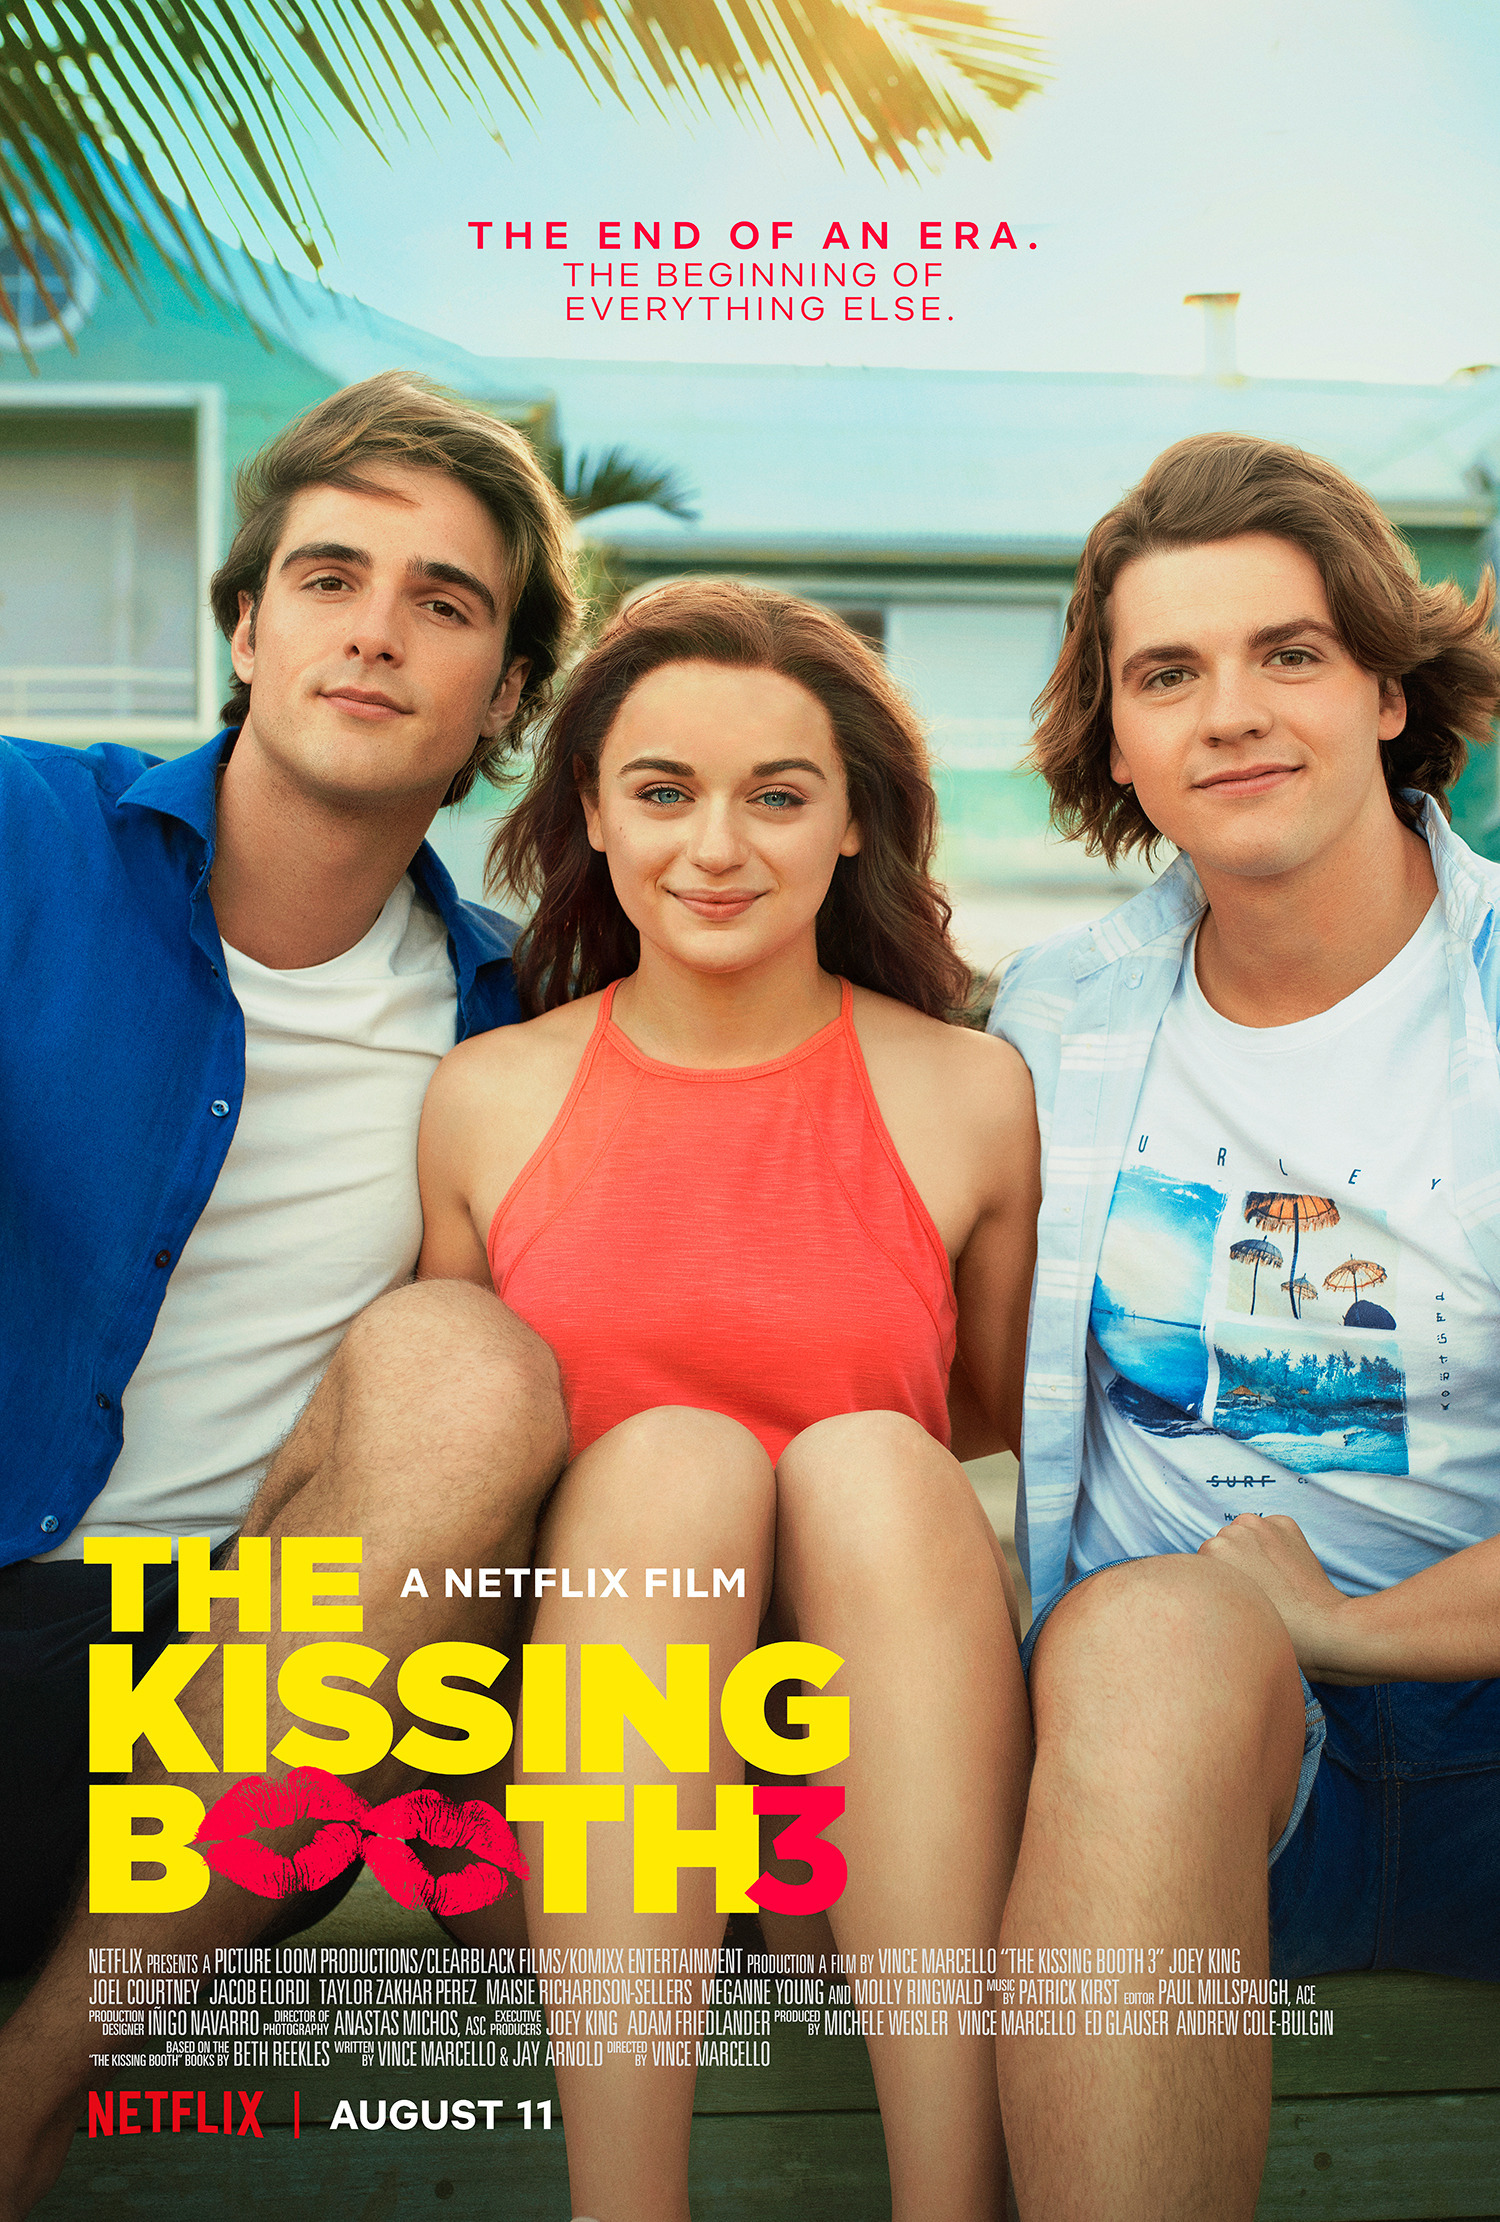 Netflix's The Kissing Booth 3 is officially available to stream now